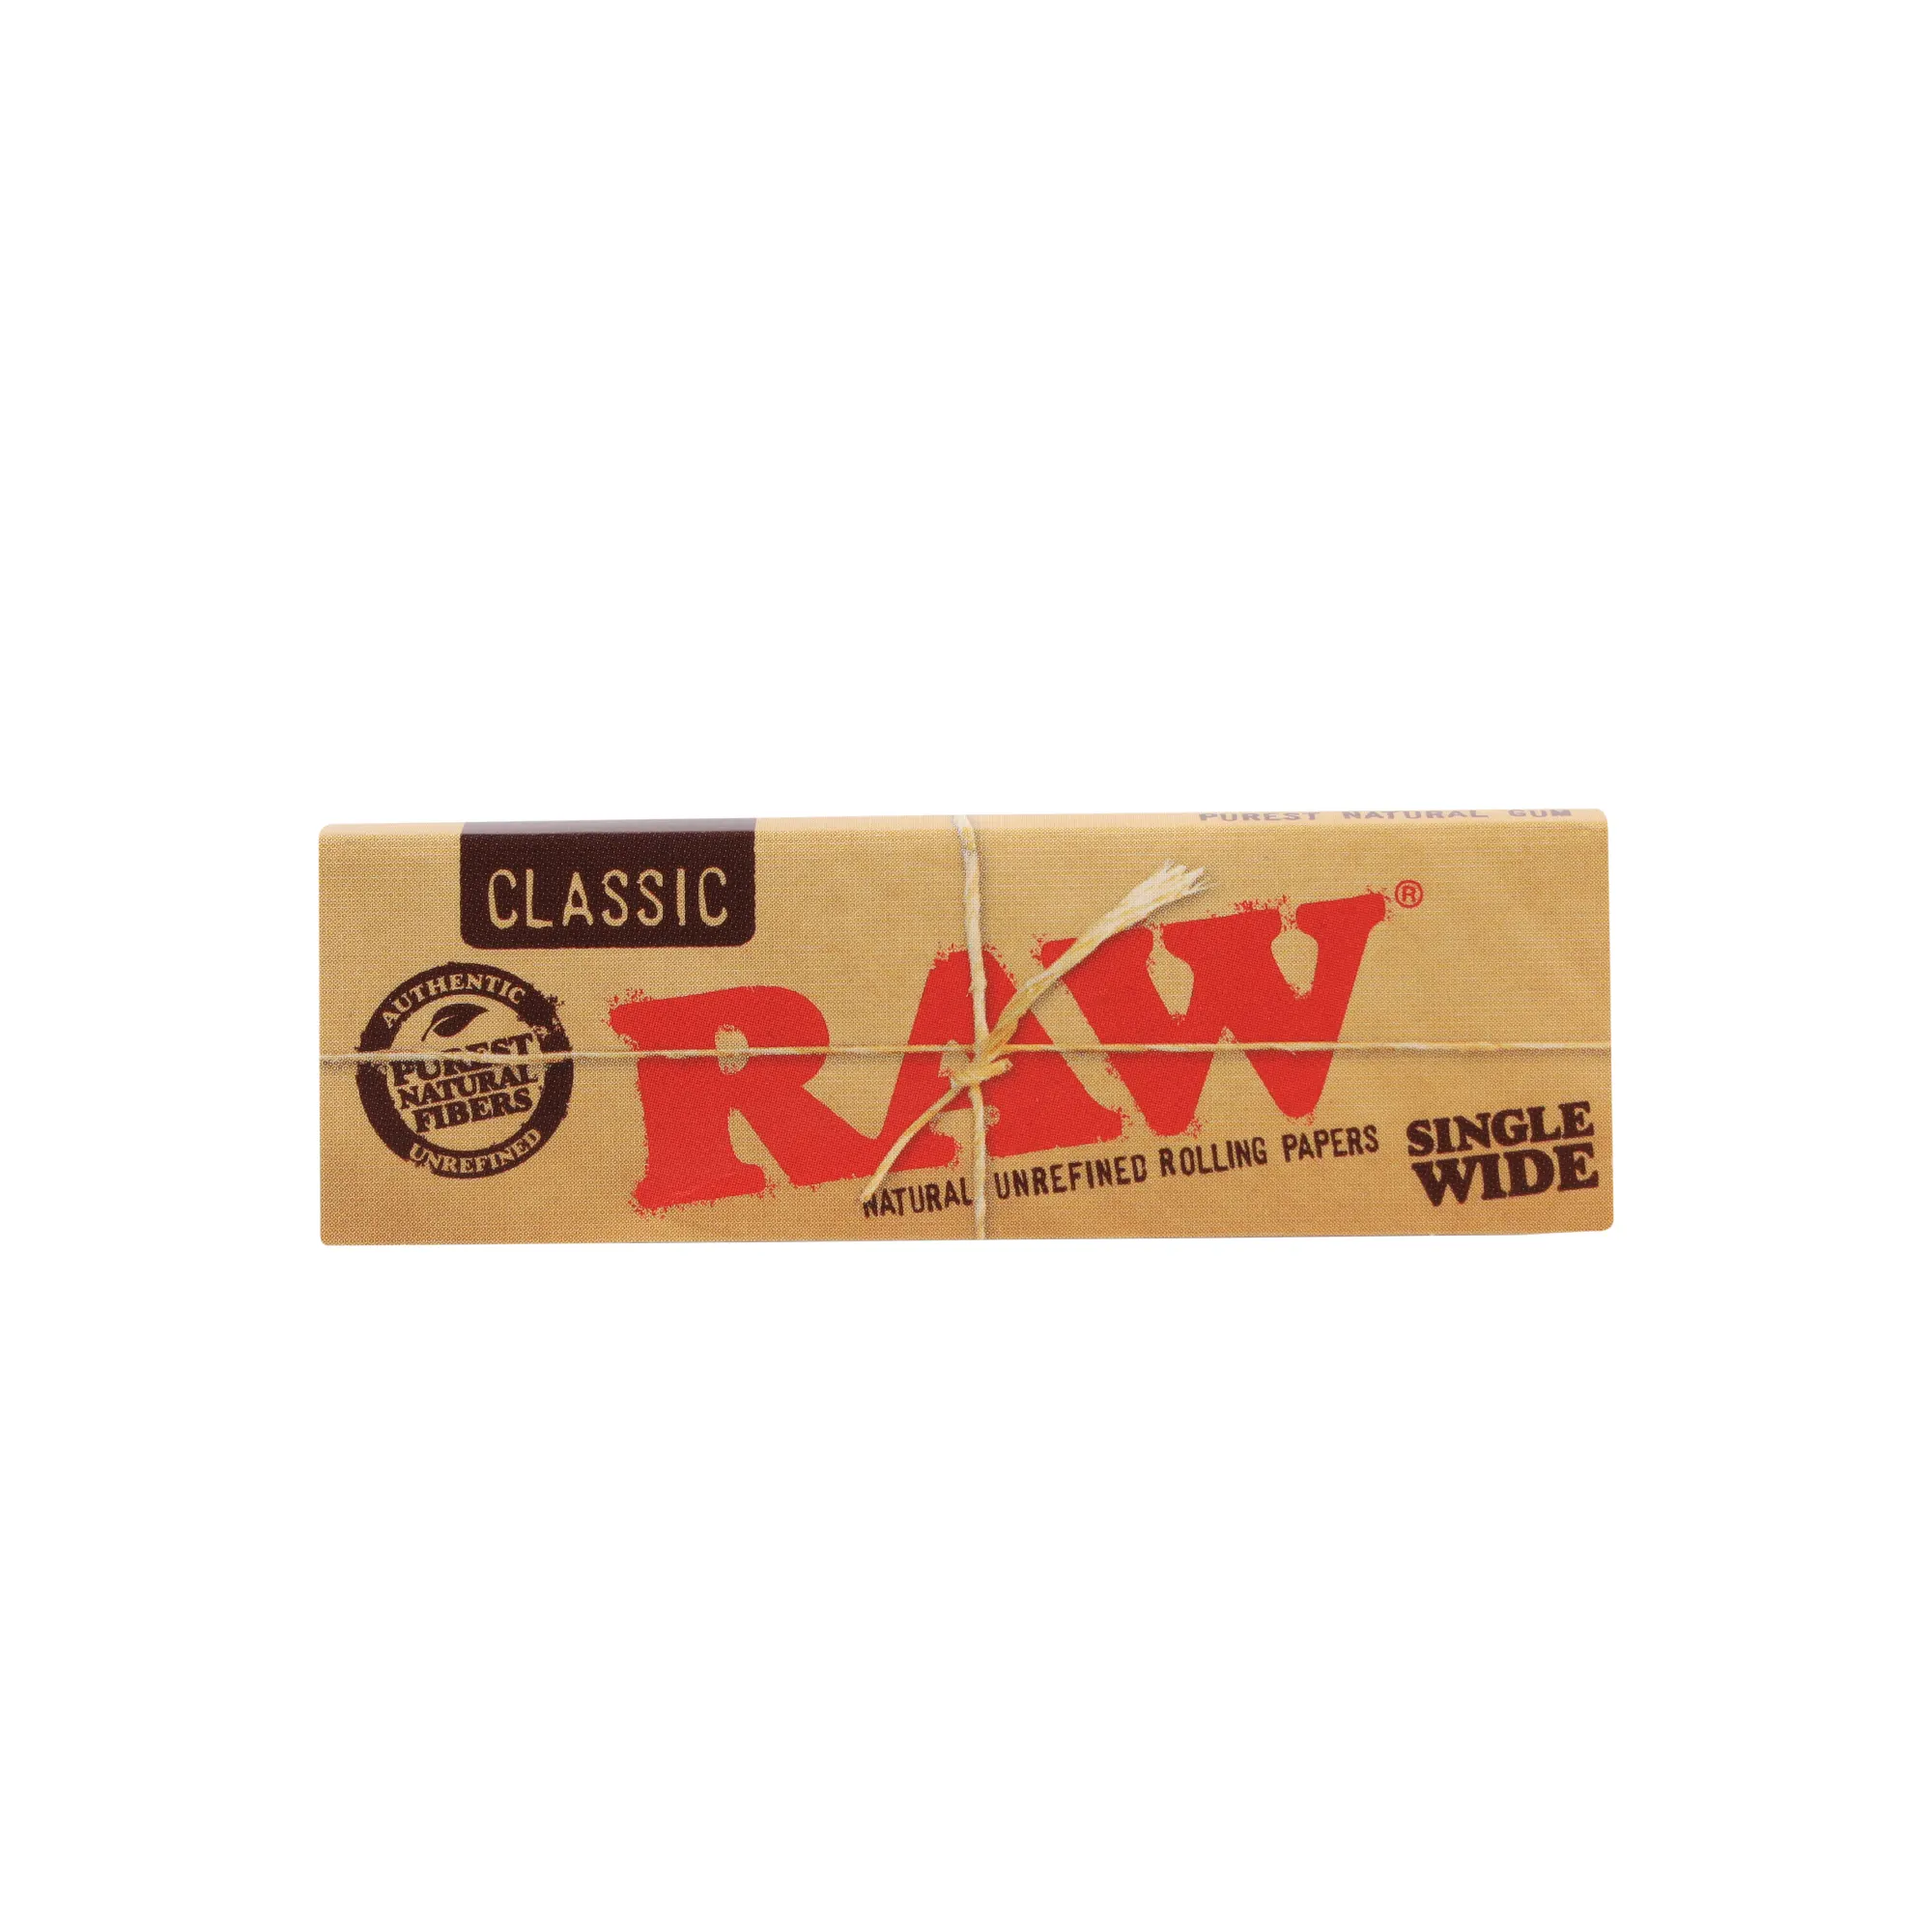 RAW classic single wide product2